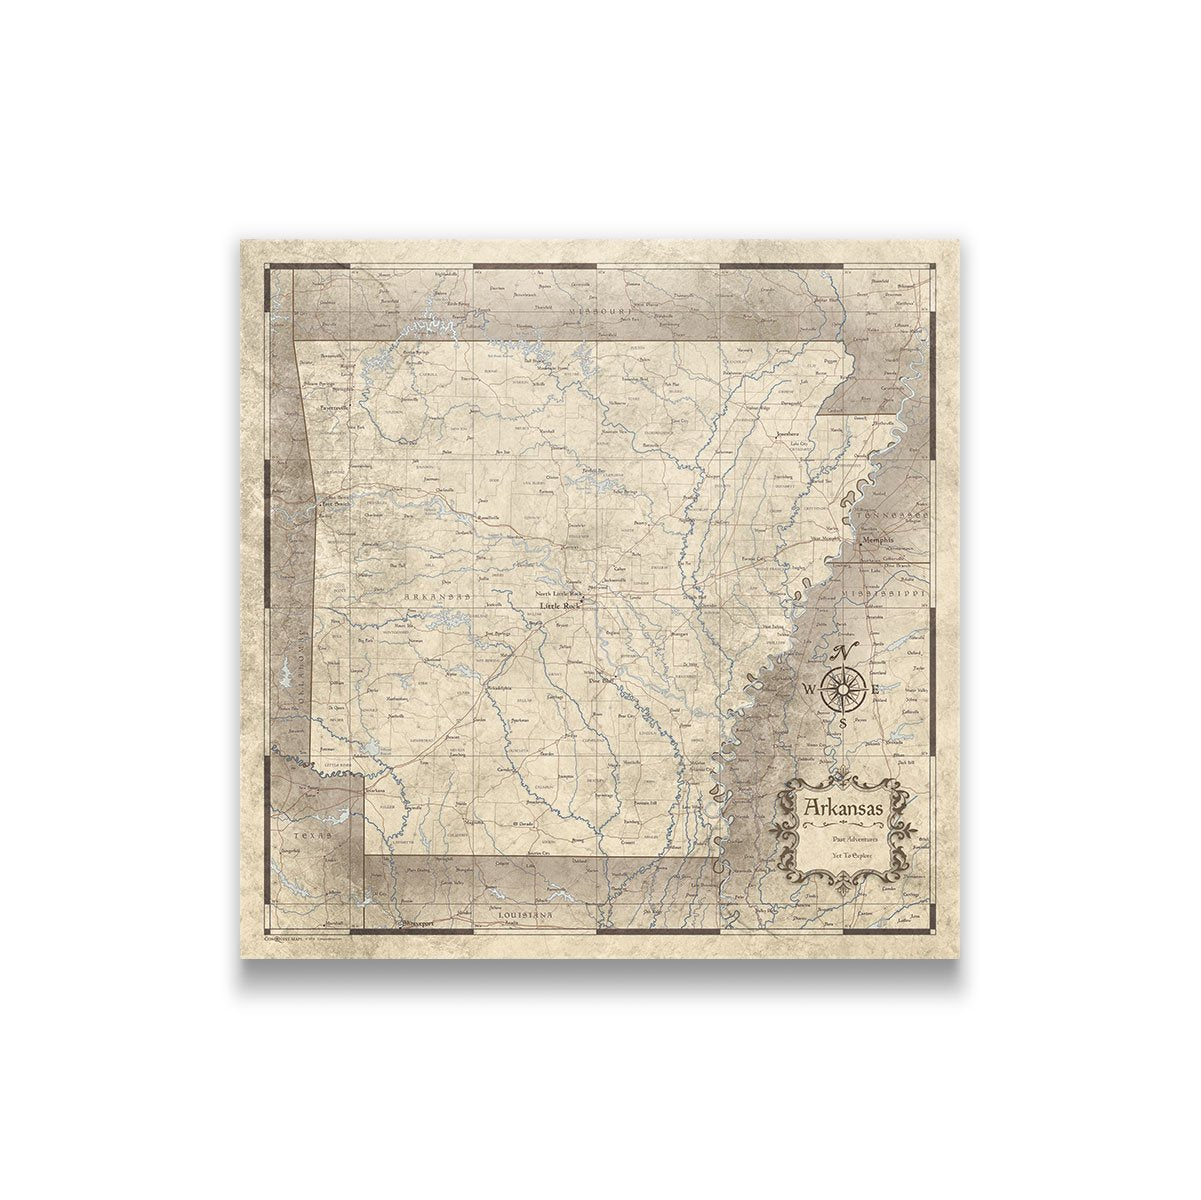 Arkansas Travel Maps For Your Home